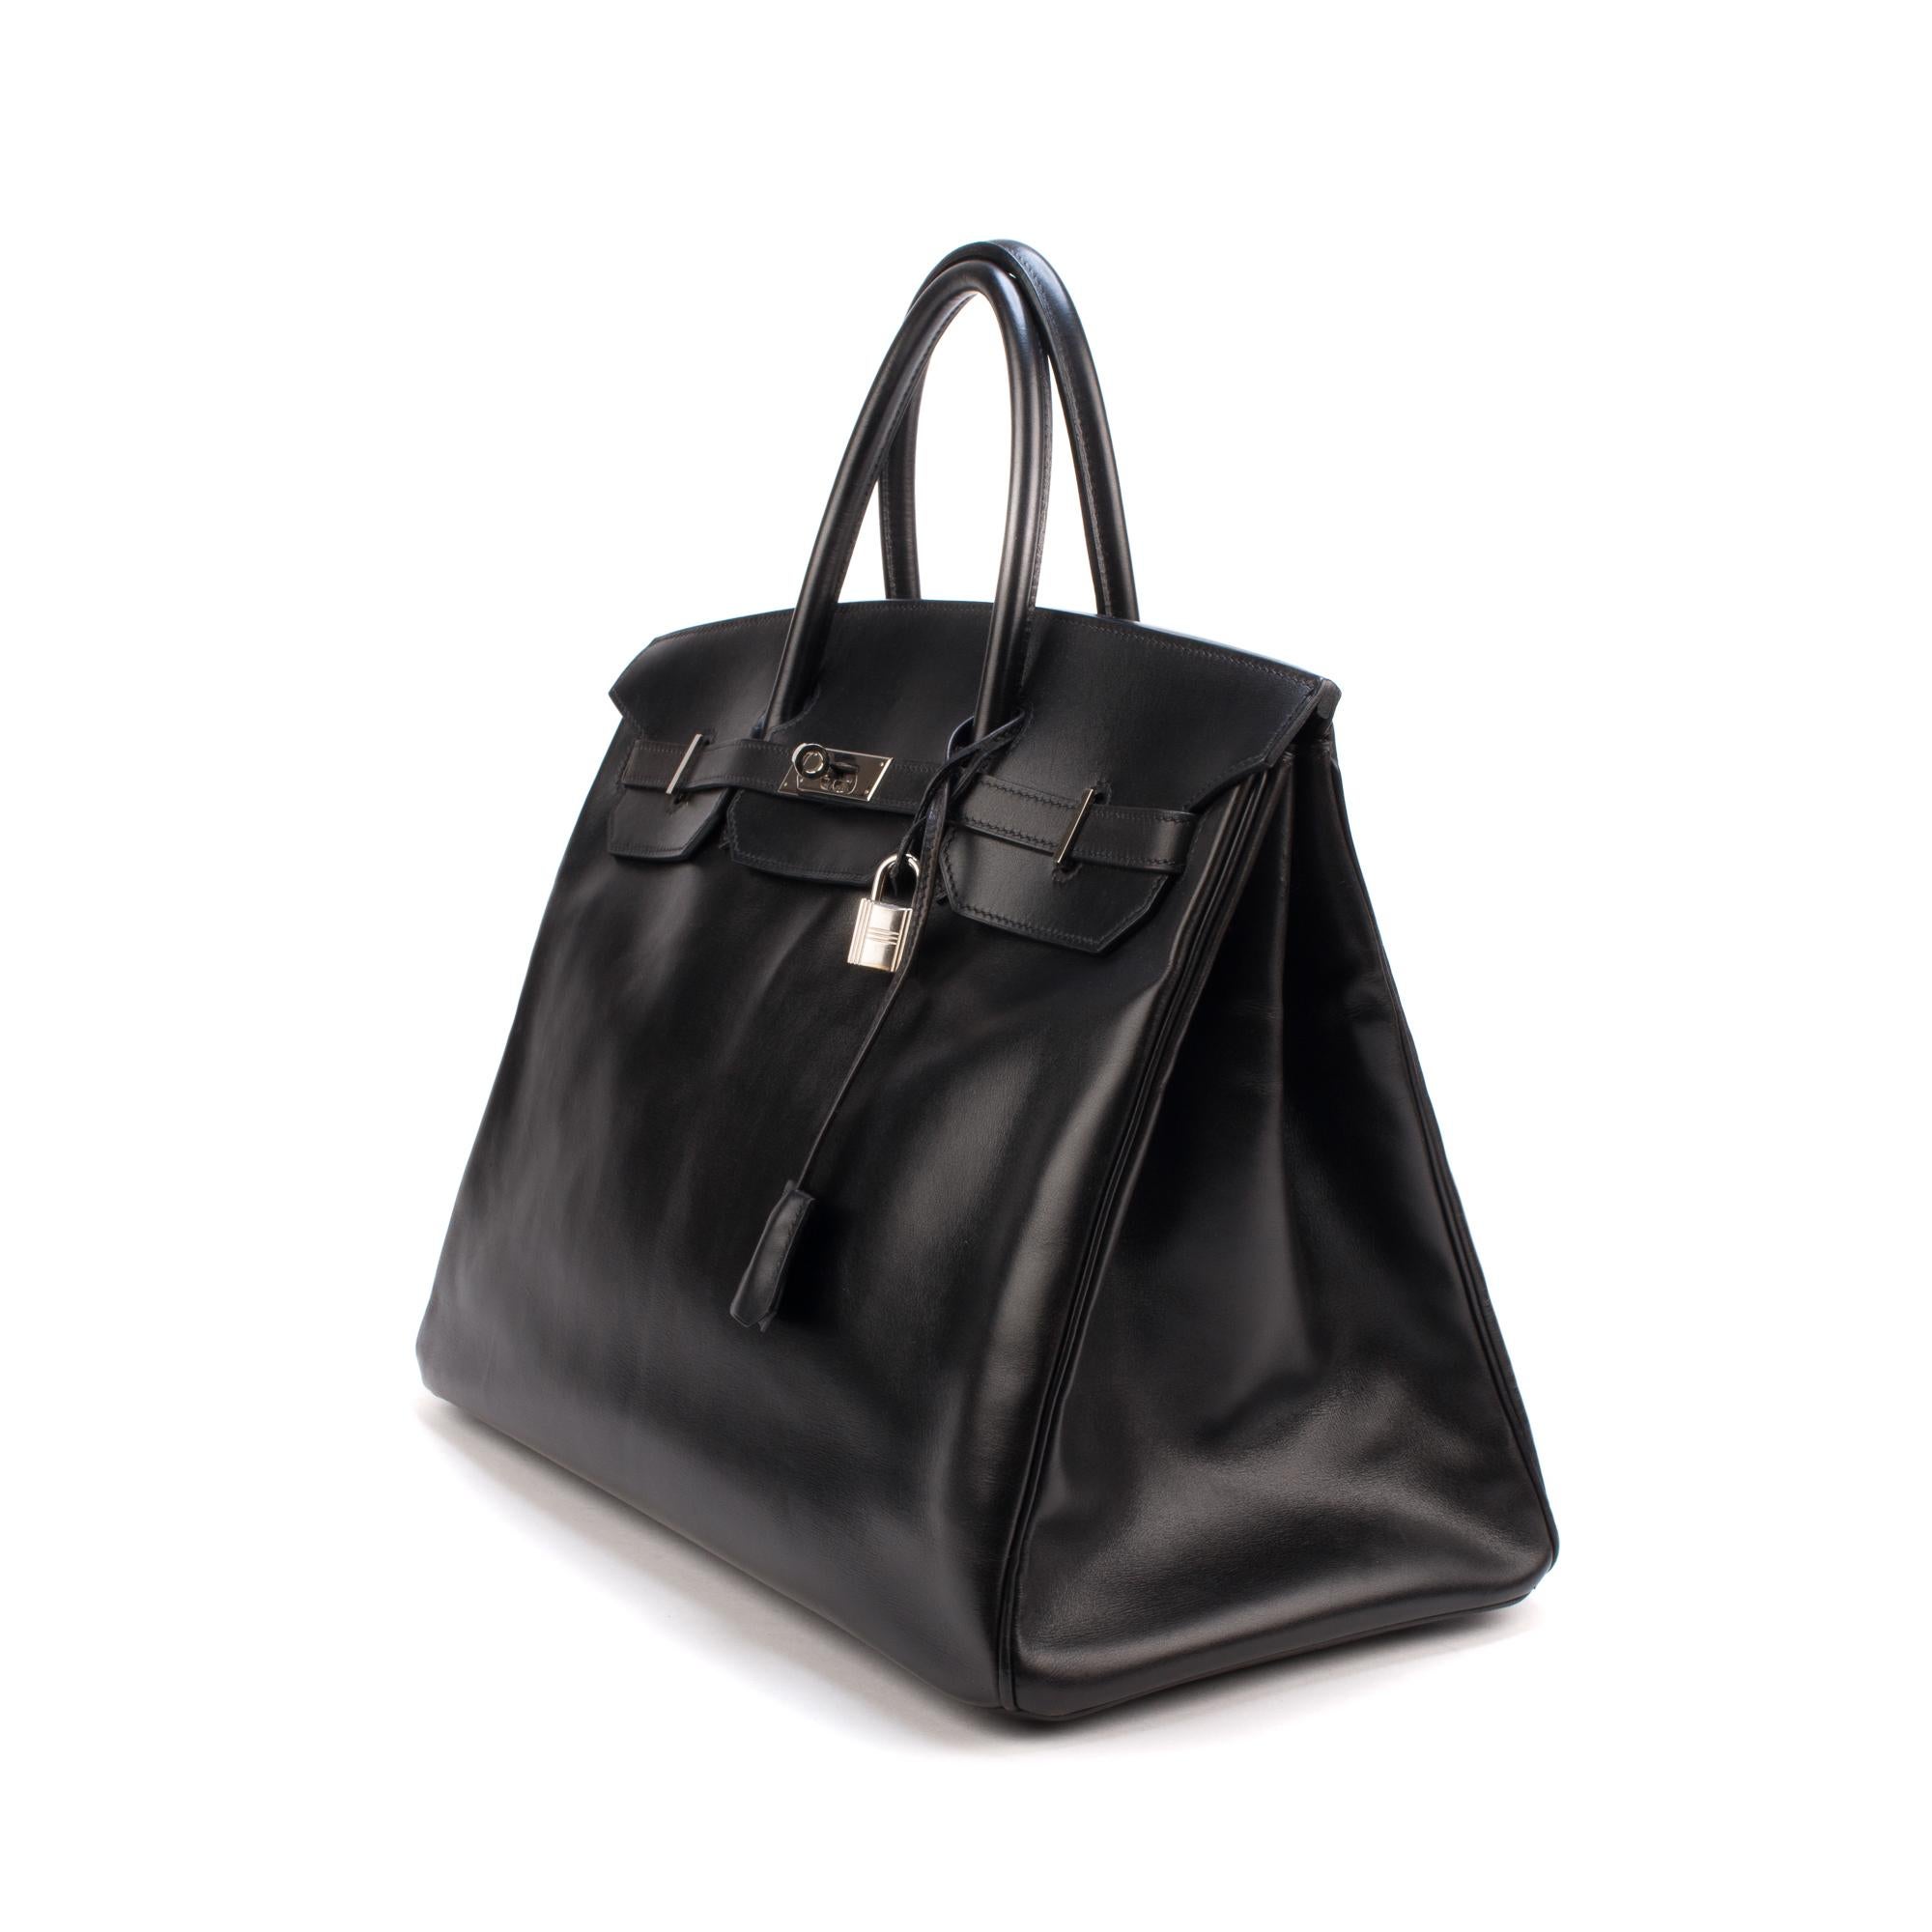 Exceptional Hermes Birkin bag 40 cm in black box leather, palladium metal hard ware, double black leather handle allowing a hand carried.

Flap closure.
Black leather lining, zipped pocket, patch pocket.
Sold with zipper, key, padlock,